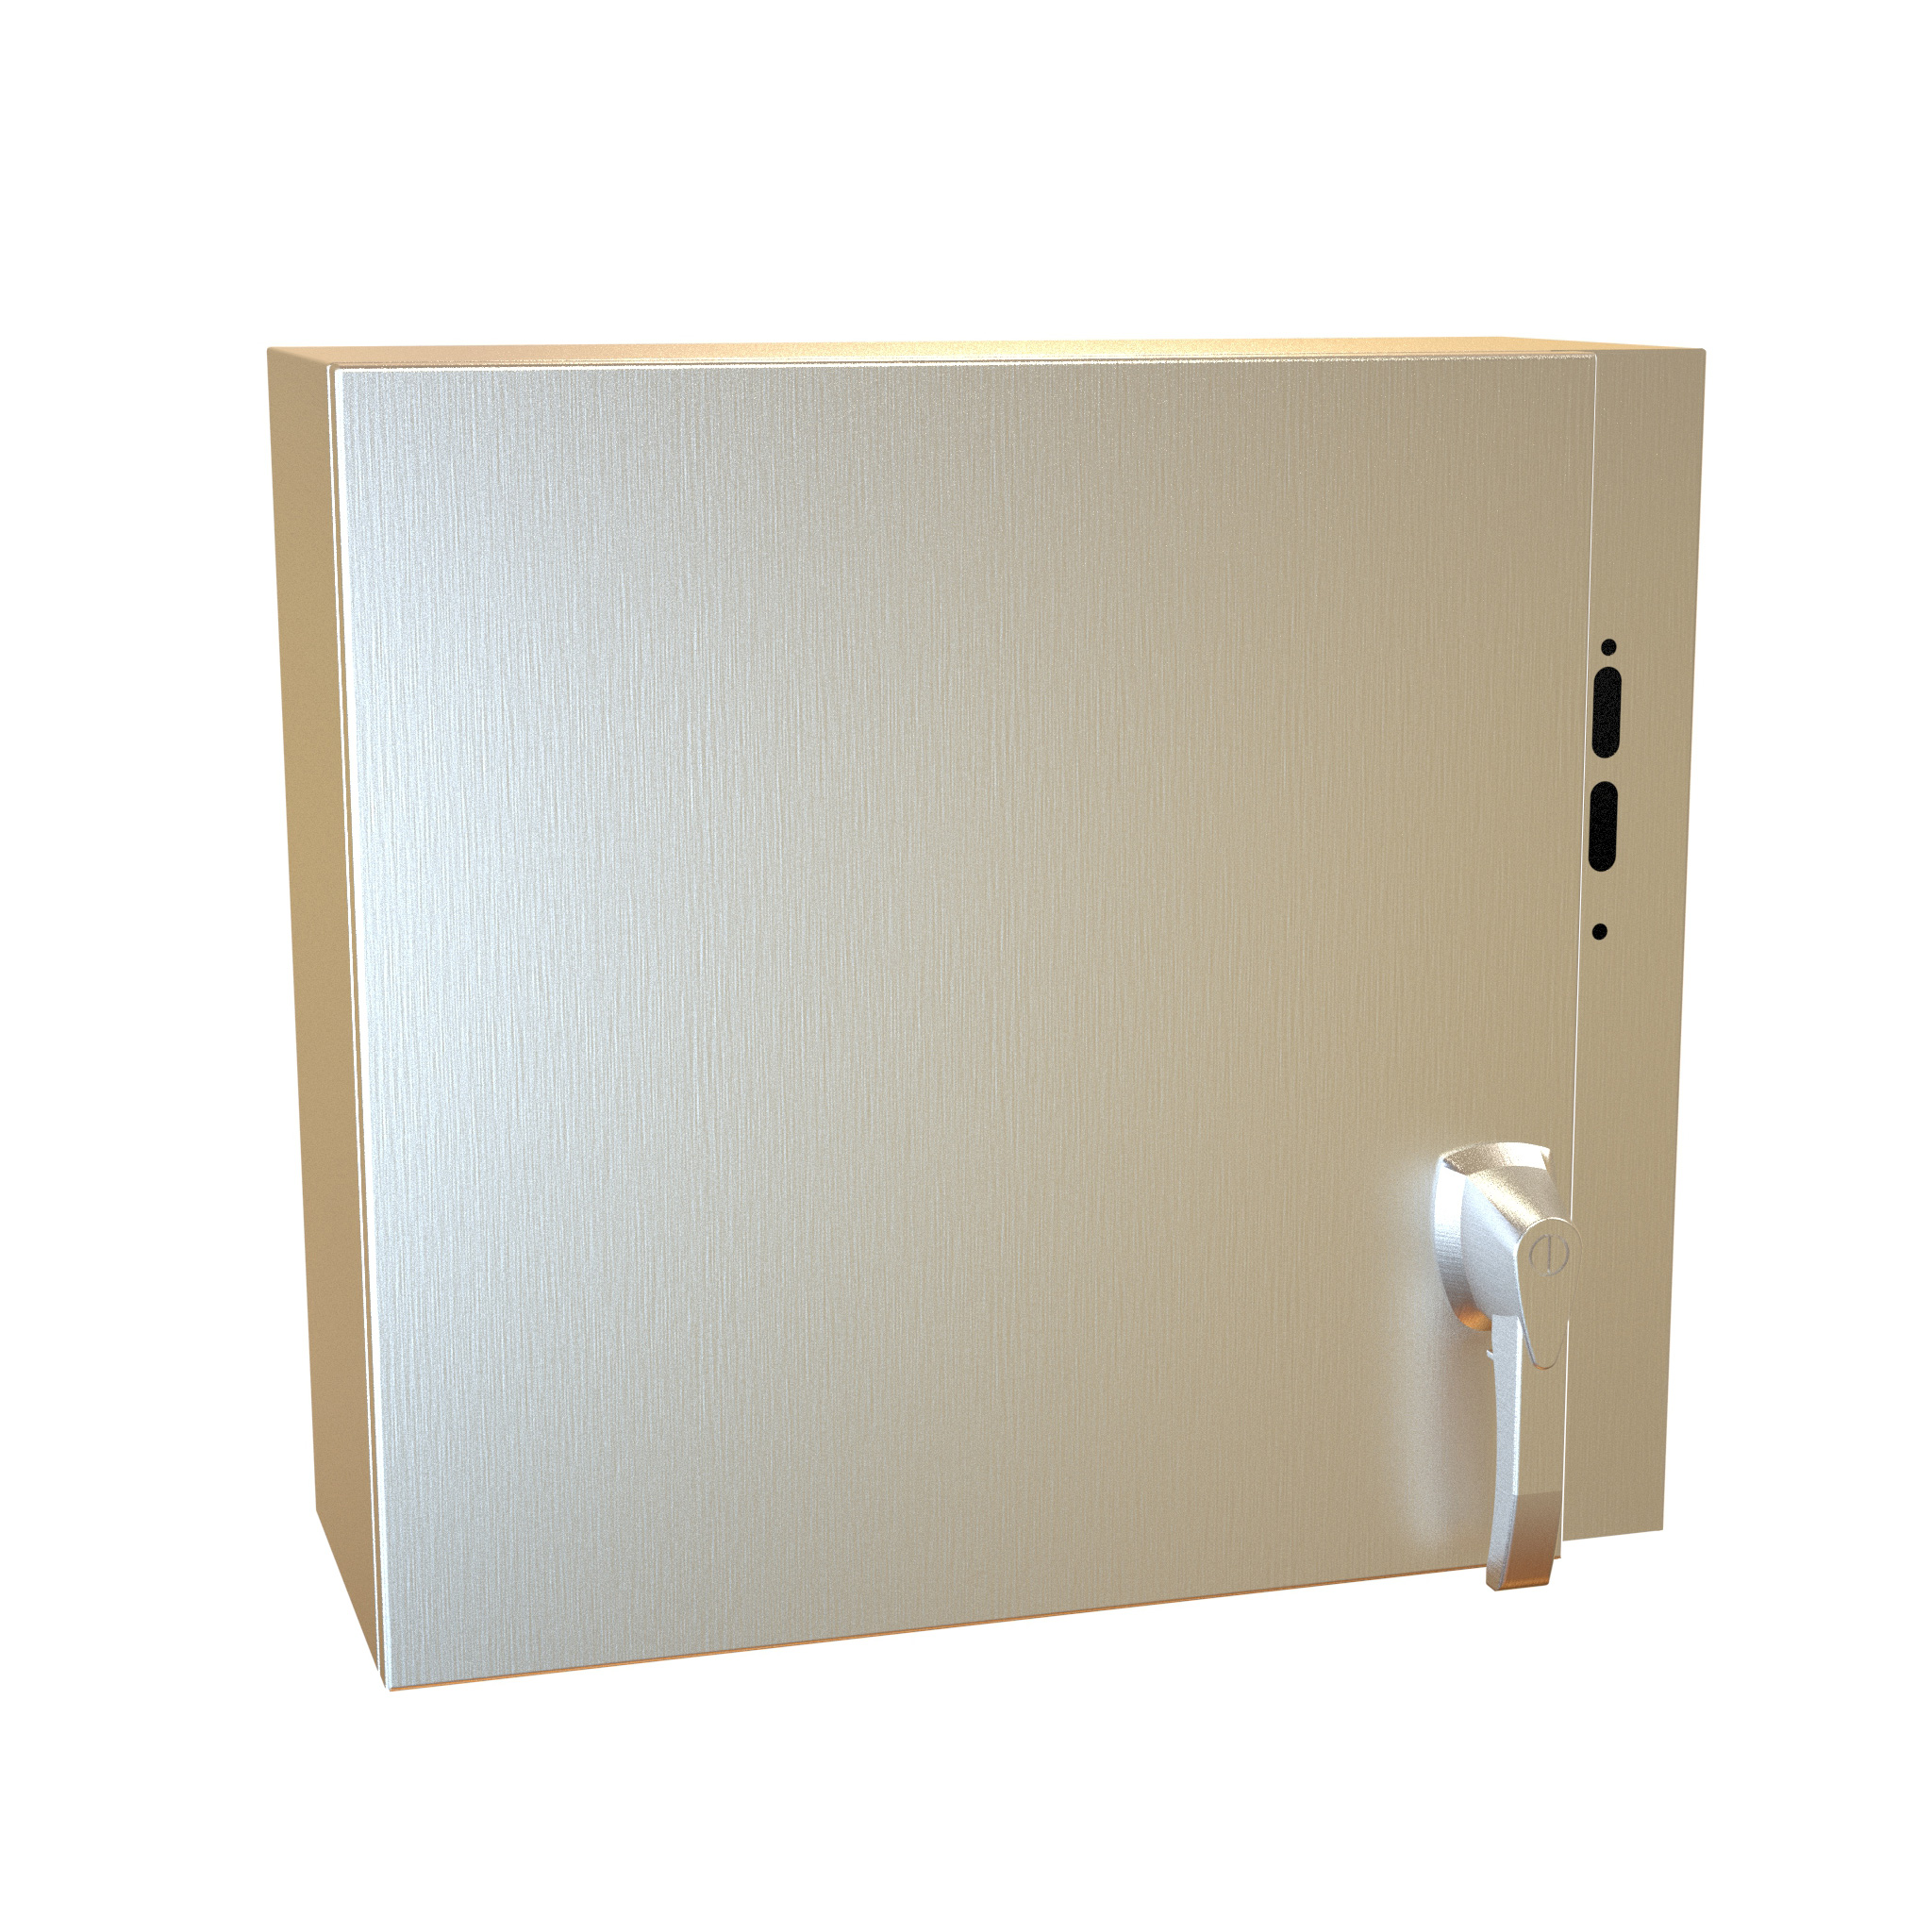 Type 4X Stainless Steel Wallmount Disconnect Enclosure Eclipse Series